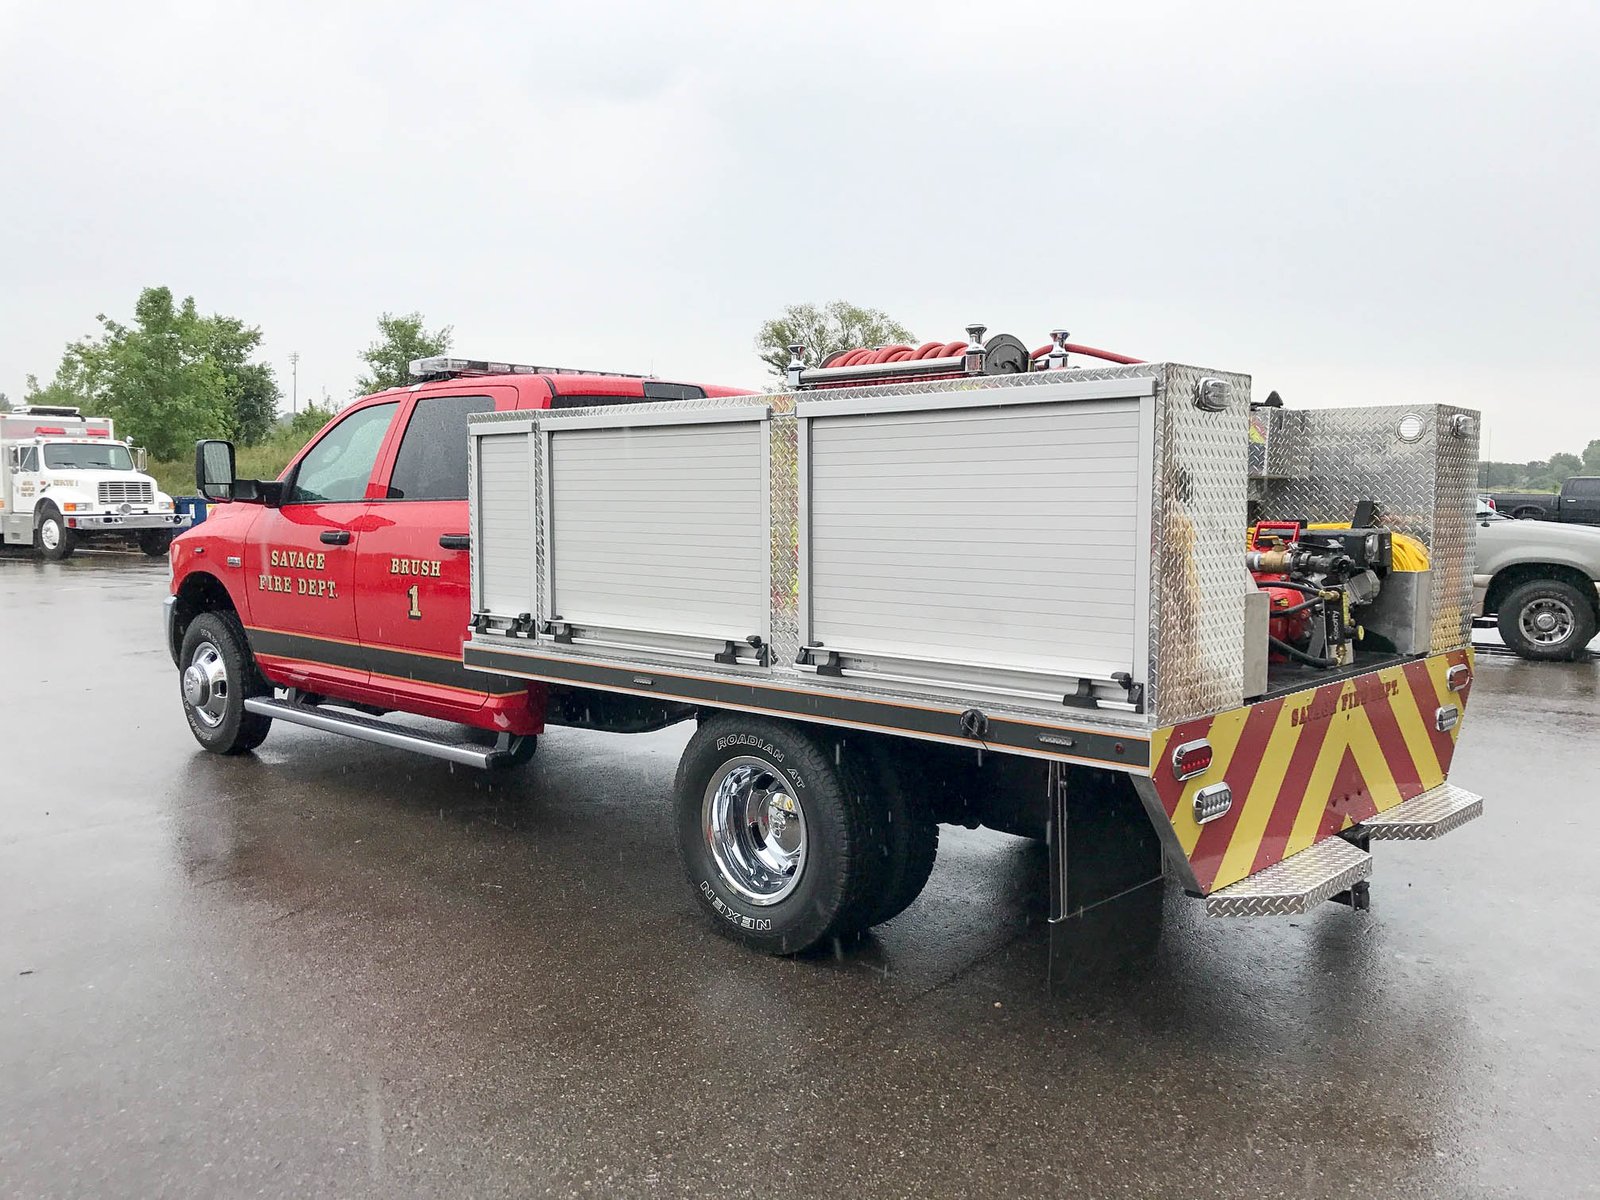 Savage Fire Department – Flat Bed